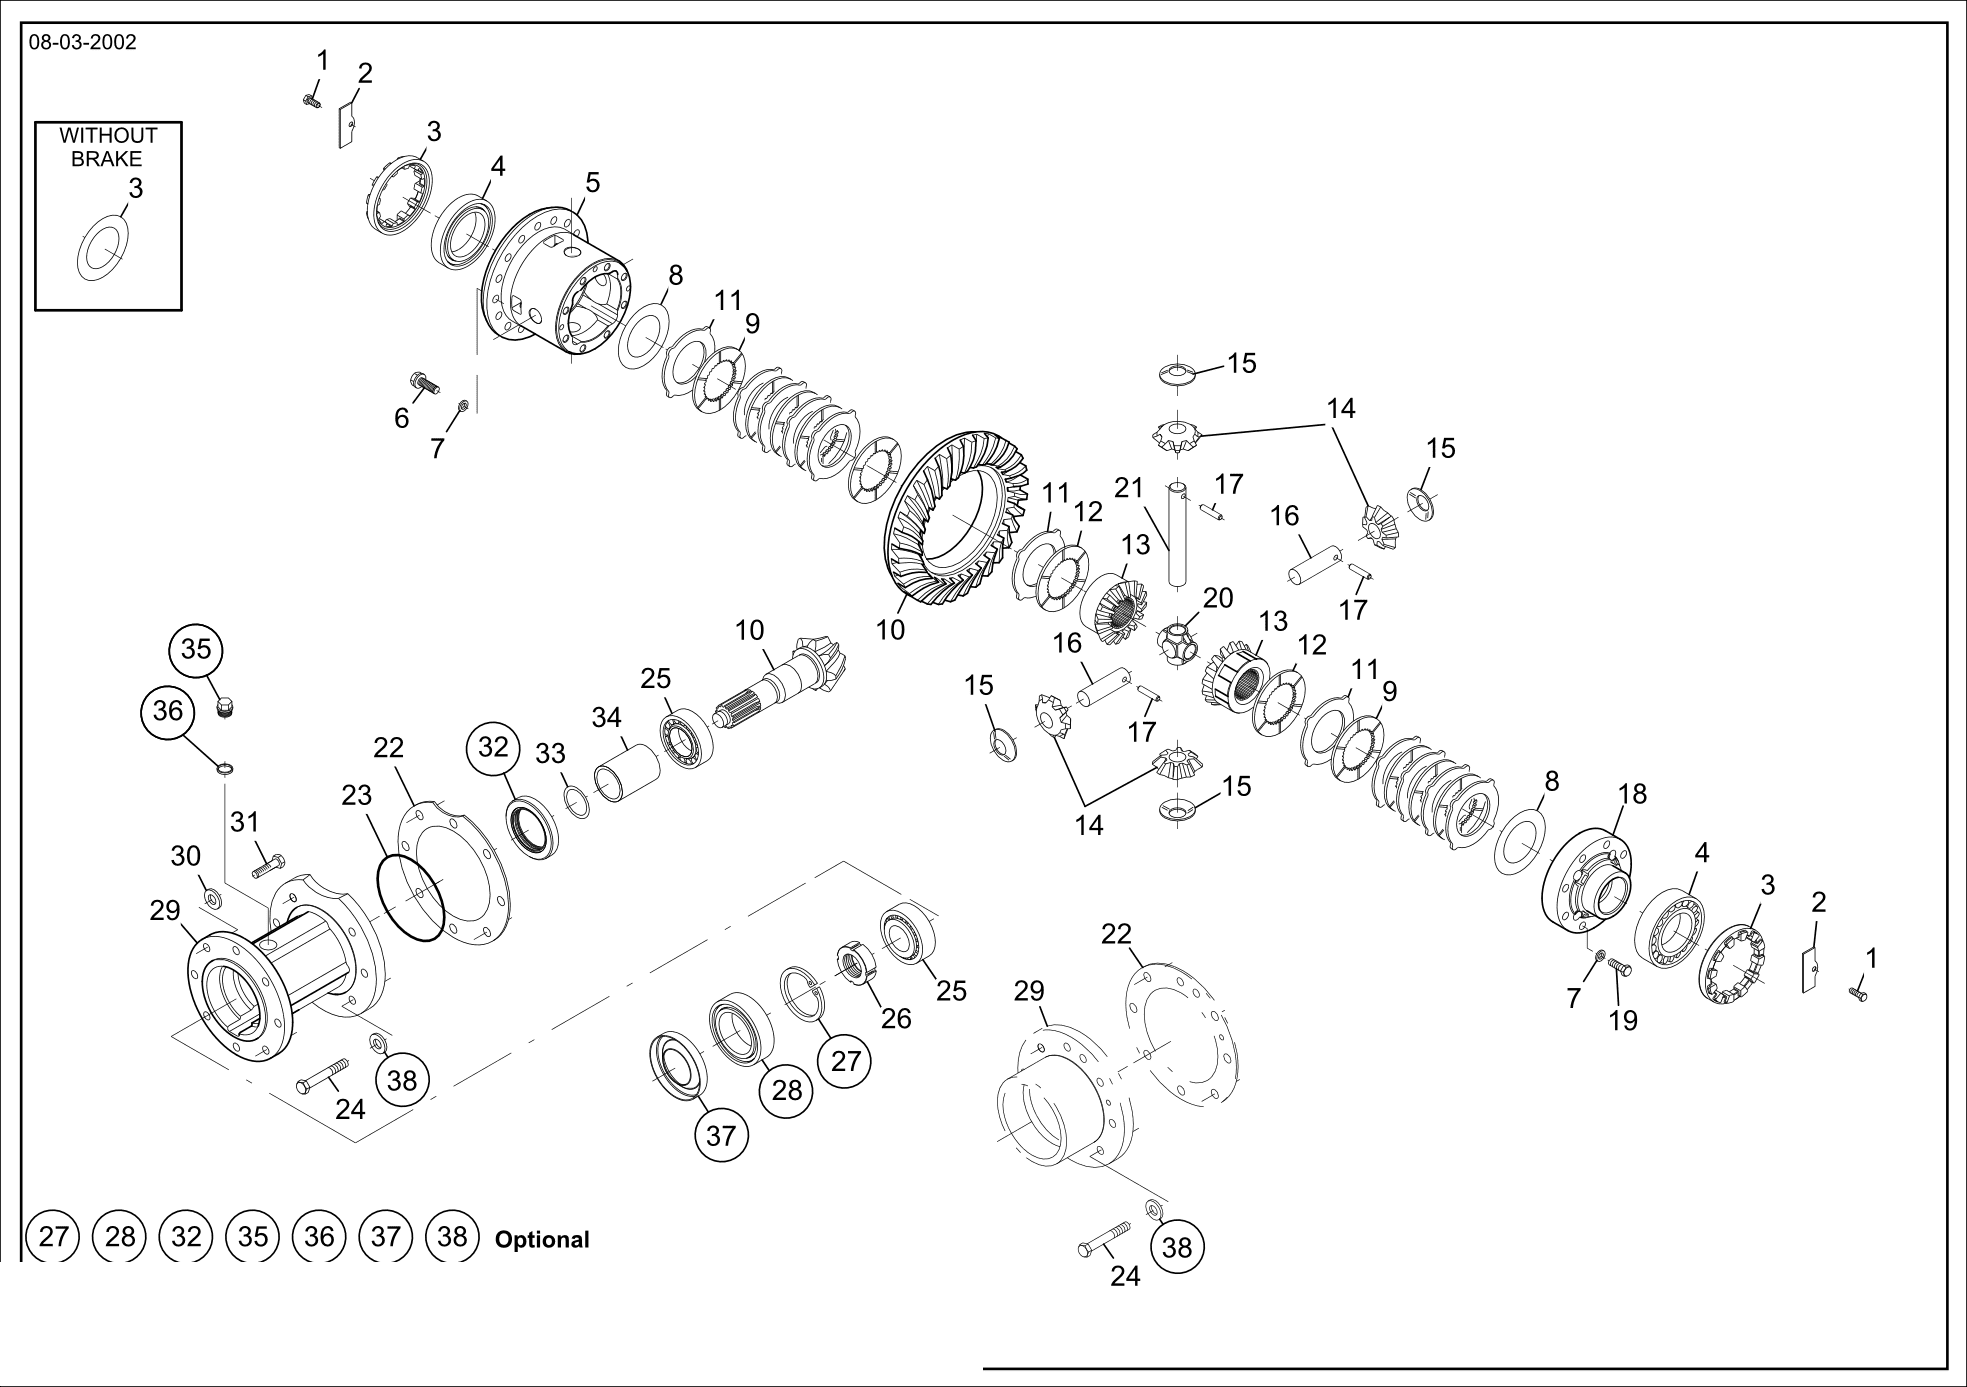 drawing for BRODERSON MANUFACTURING 0-055-00188 - SHIM (figure 5)